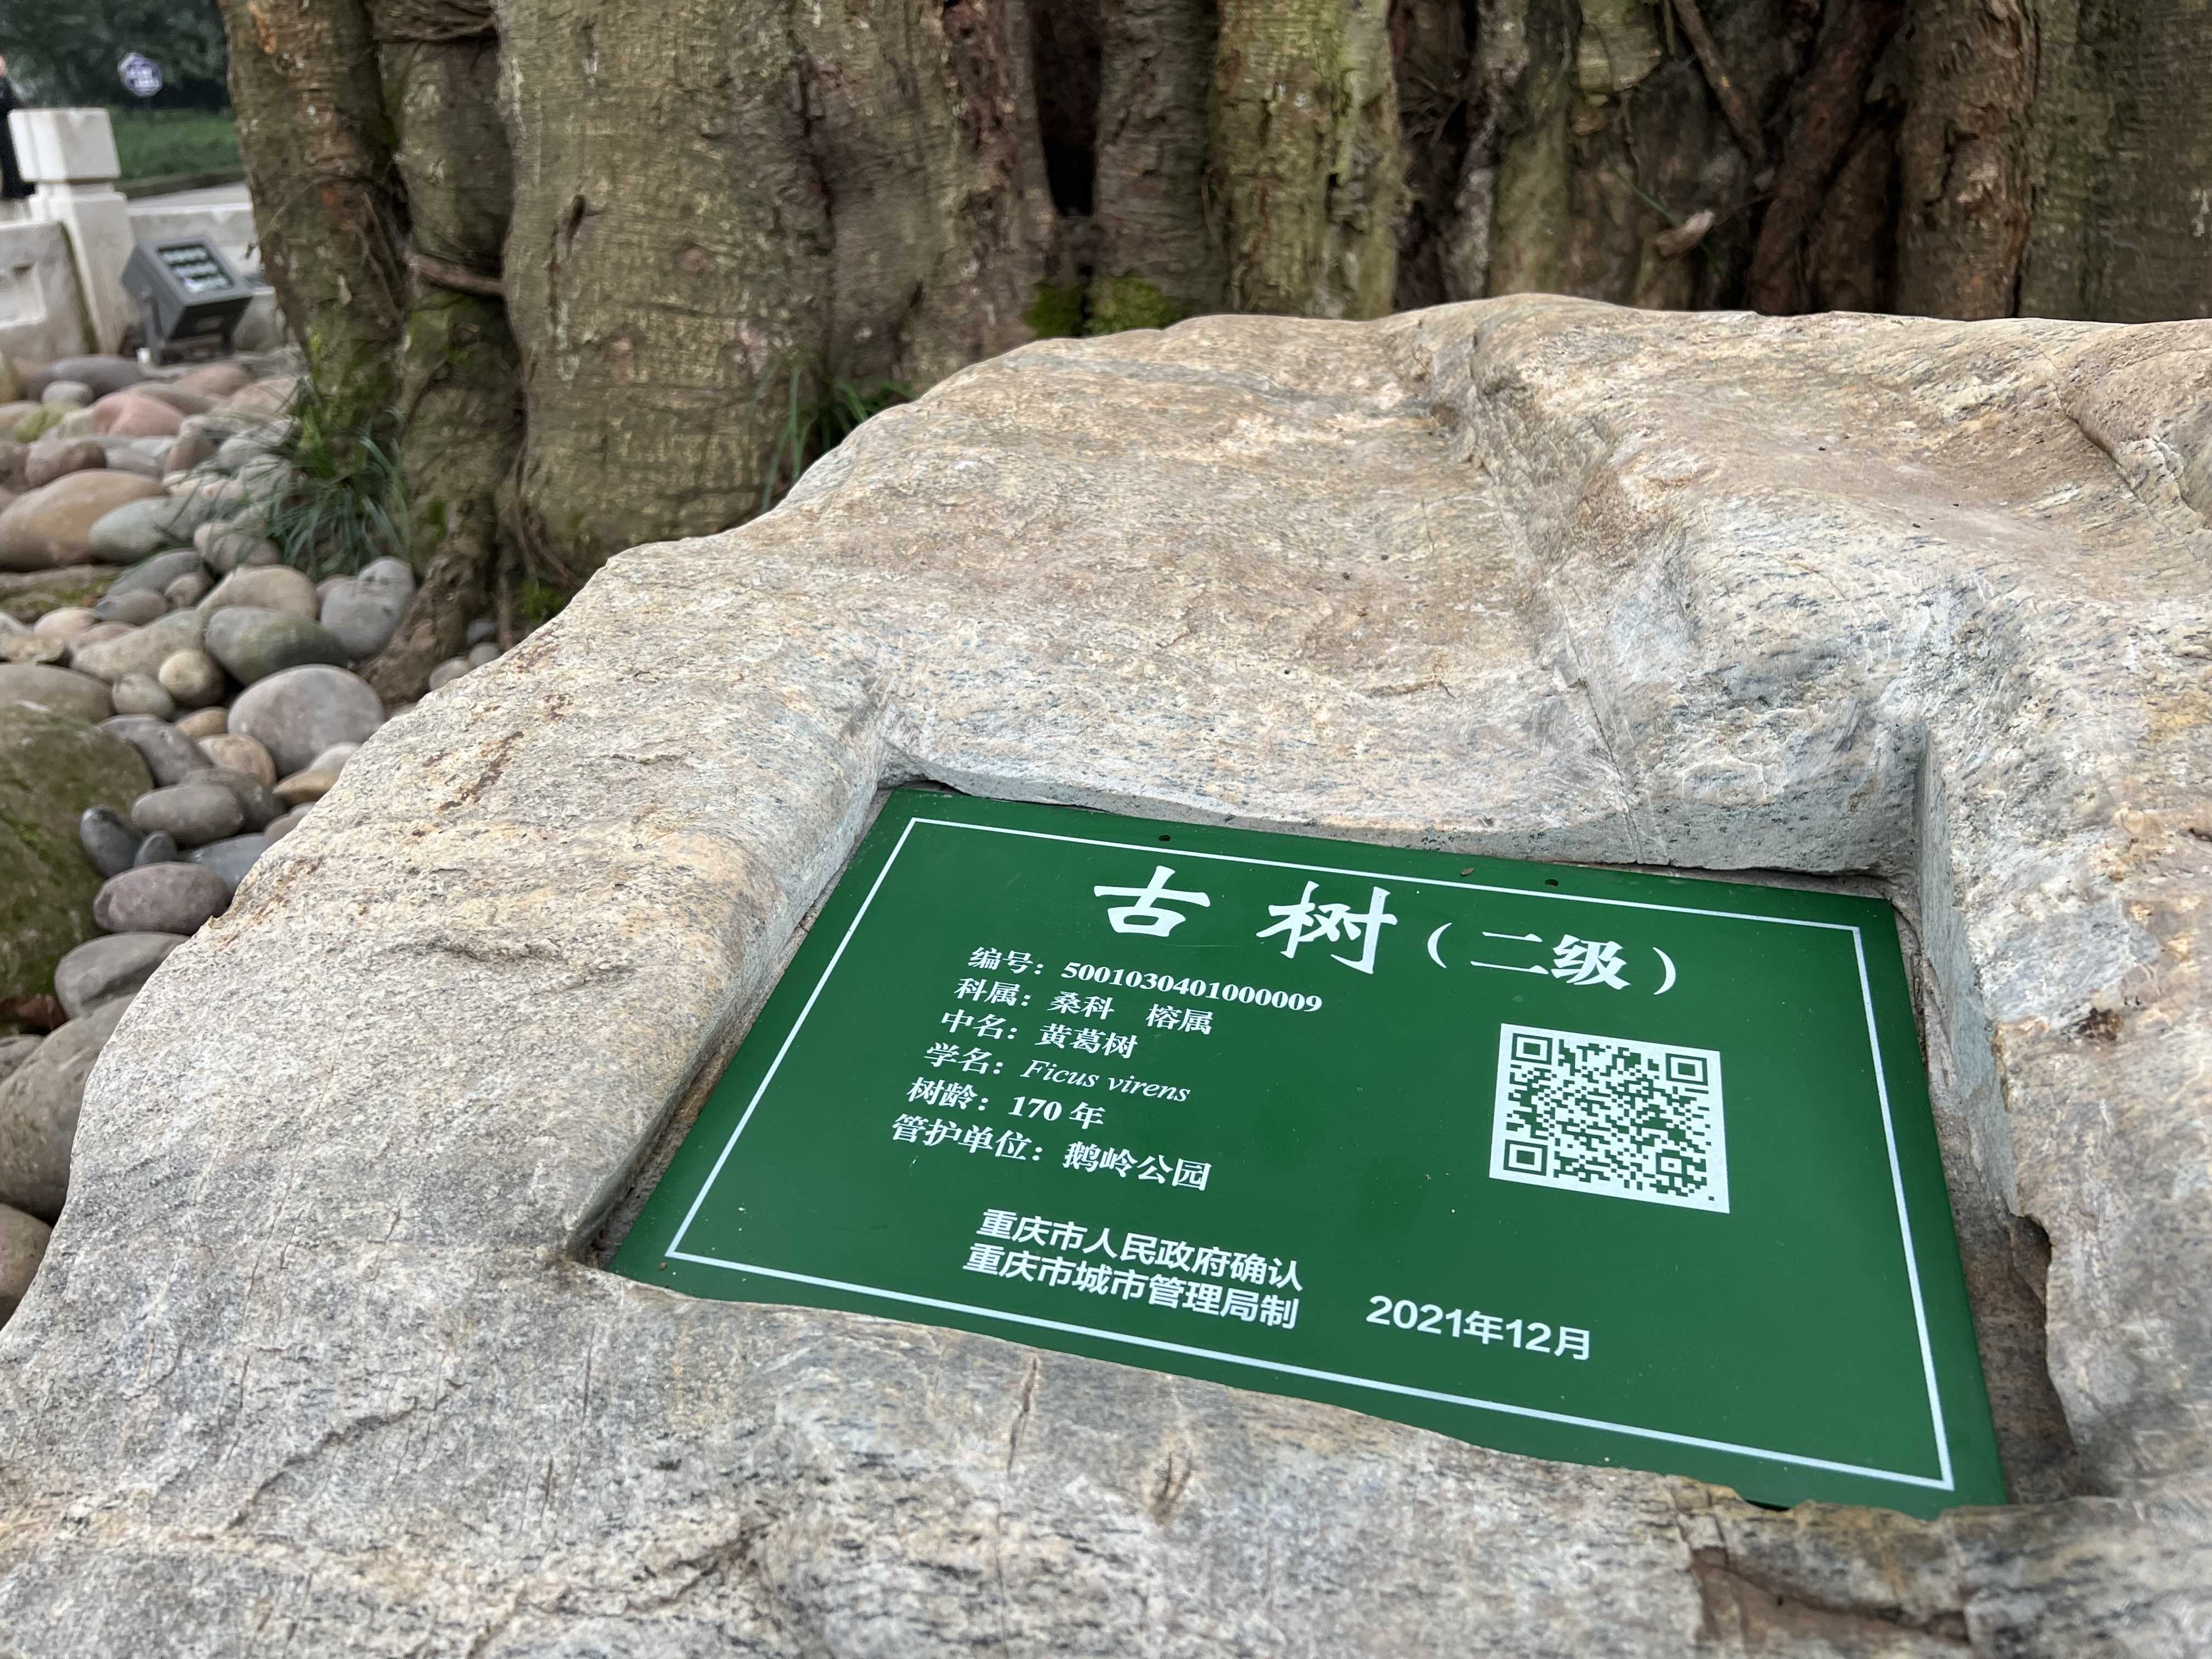 The Oldest City Tree in Chongqing Reaches 1,000 Years Old 